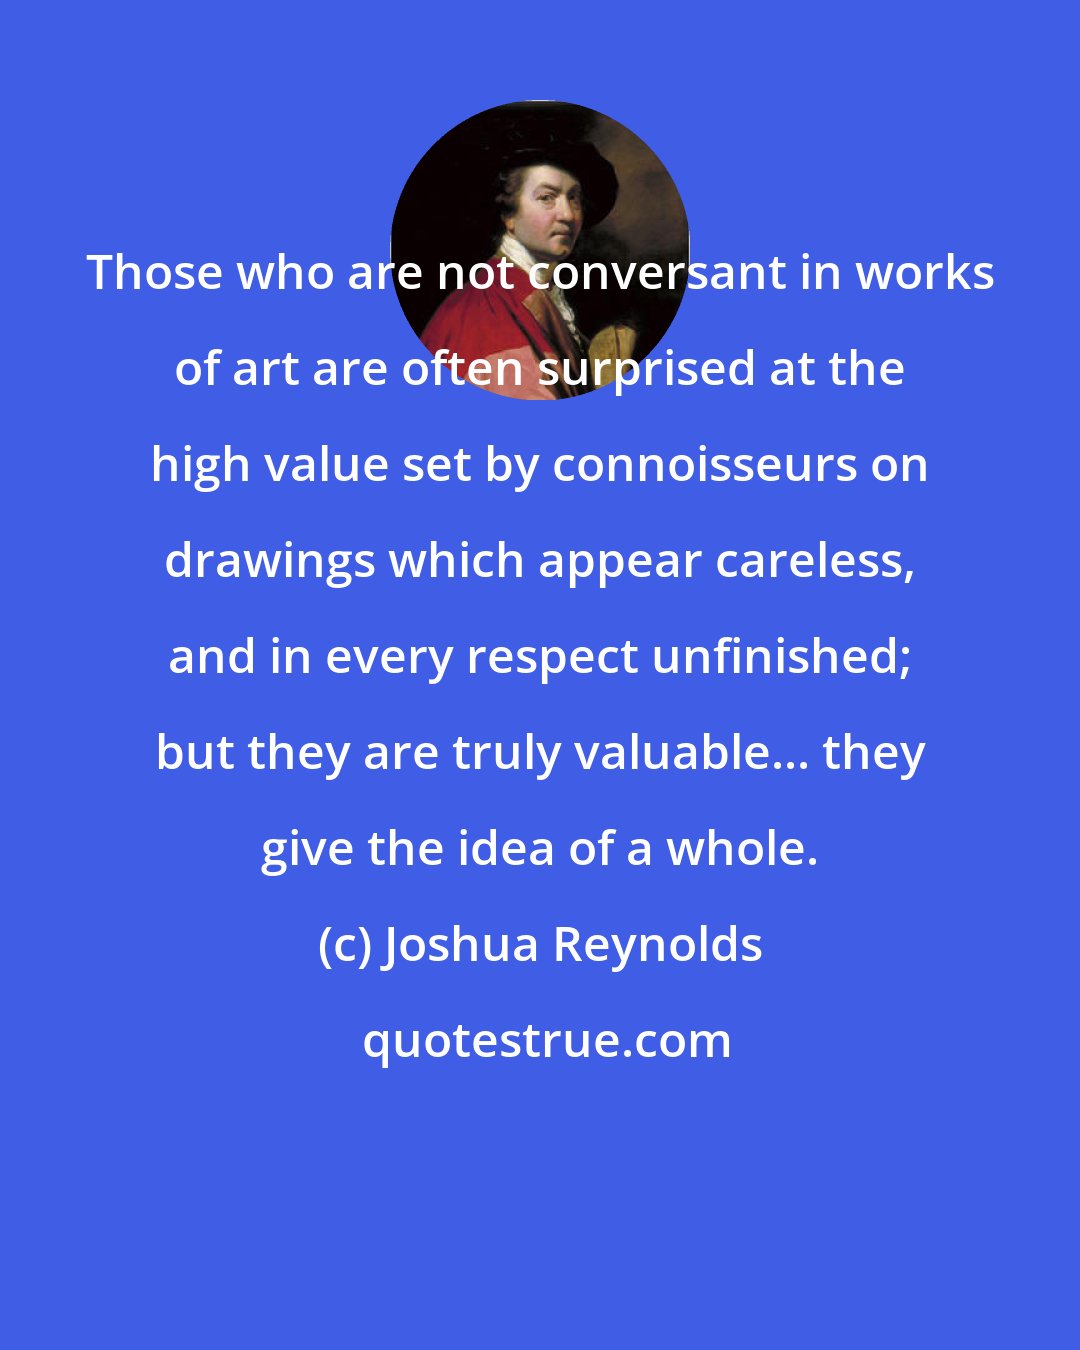 Joshua Reynolds: Those who are not conversant in works of art are often surprised at the high value set by connoisseurs on drawings which appear careless, and in every respect unfinished; but they are truly valuable... they give the idea of a whole.